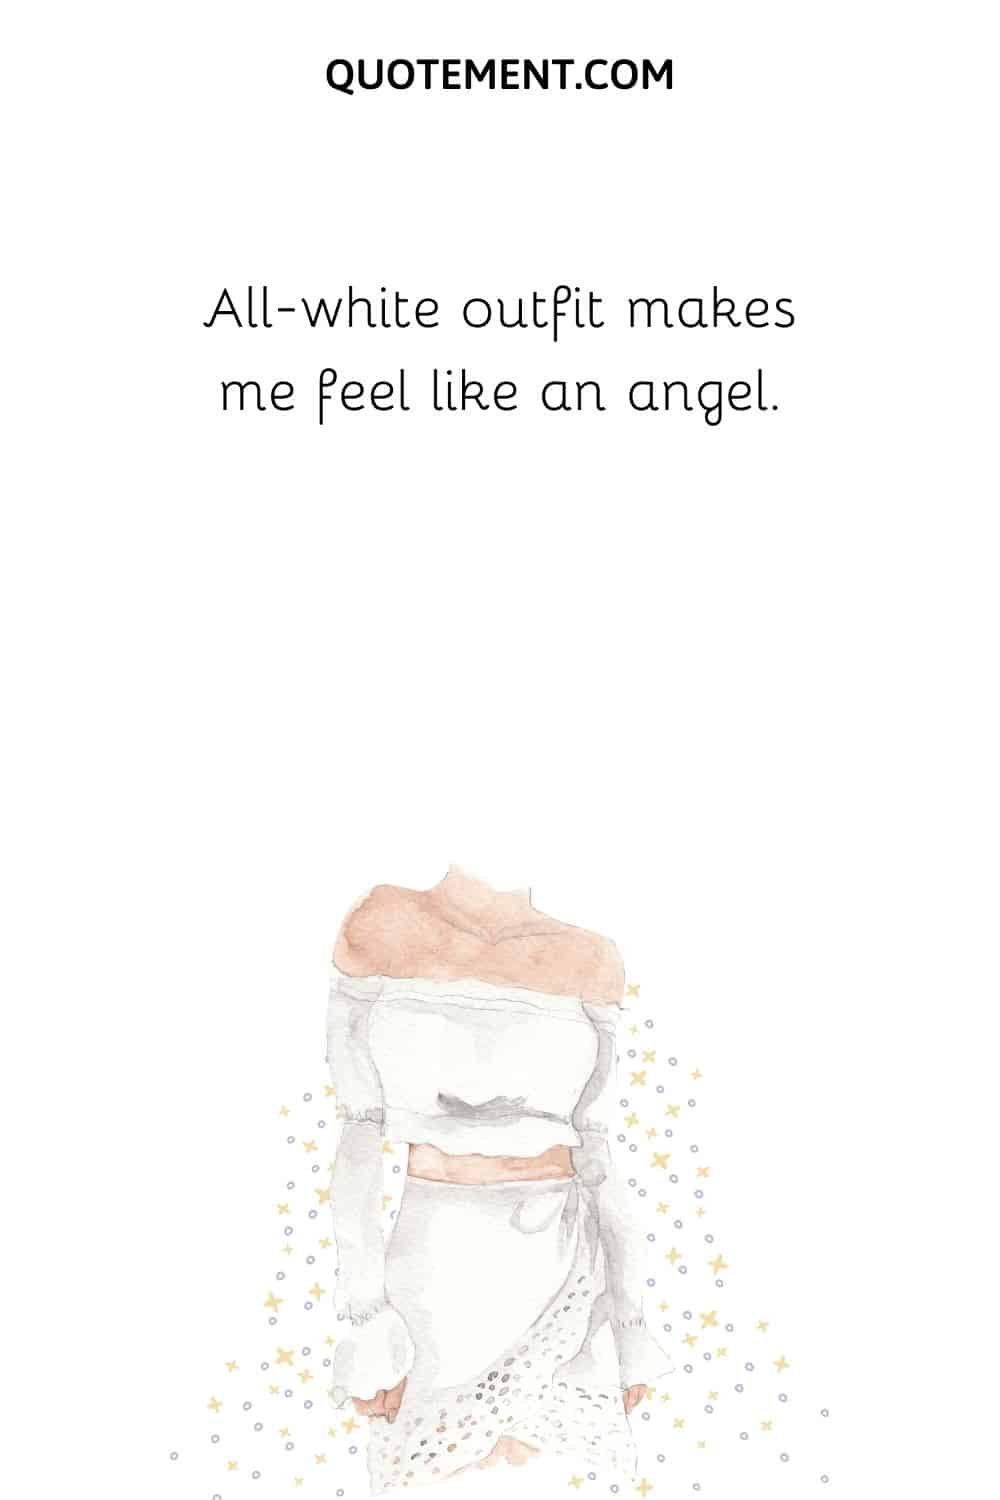 All-white outfit makes me feel like an angel.